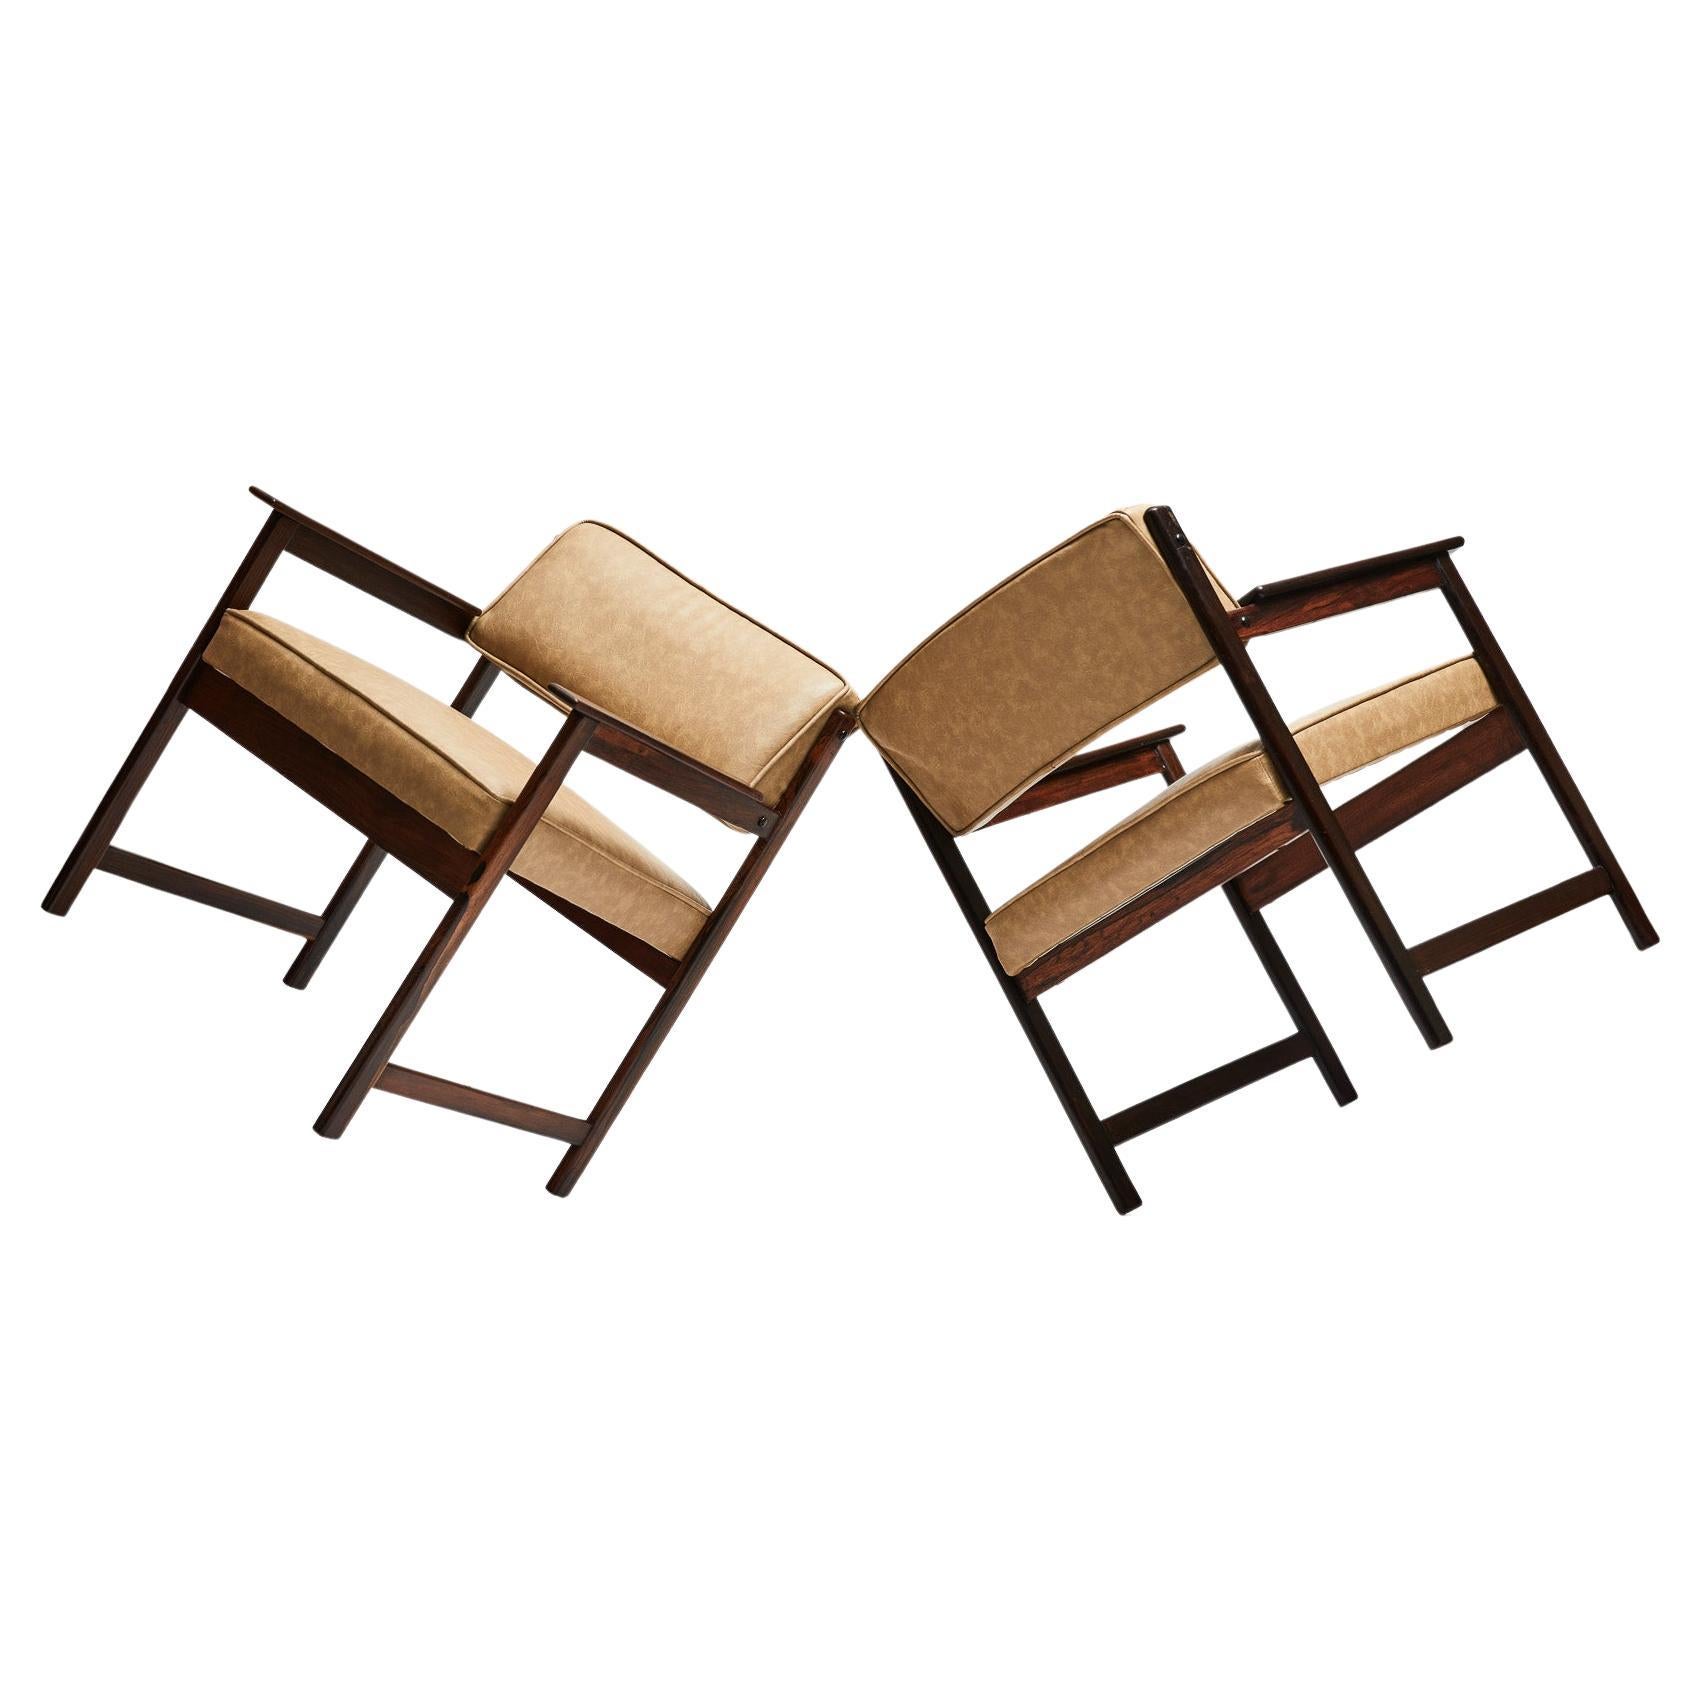 Midcentury Modern Armchairs in Hardwood & Beige Leather by Jorge Jabour, Brazil